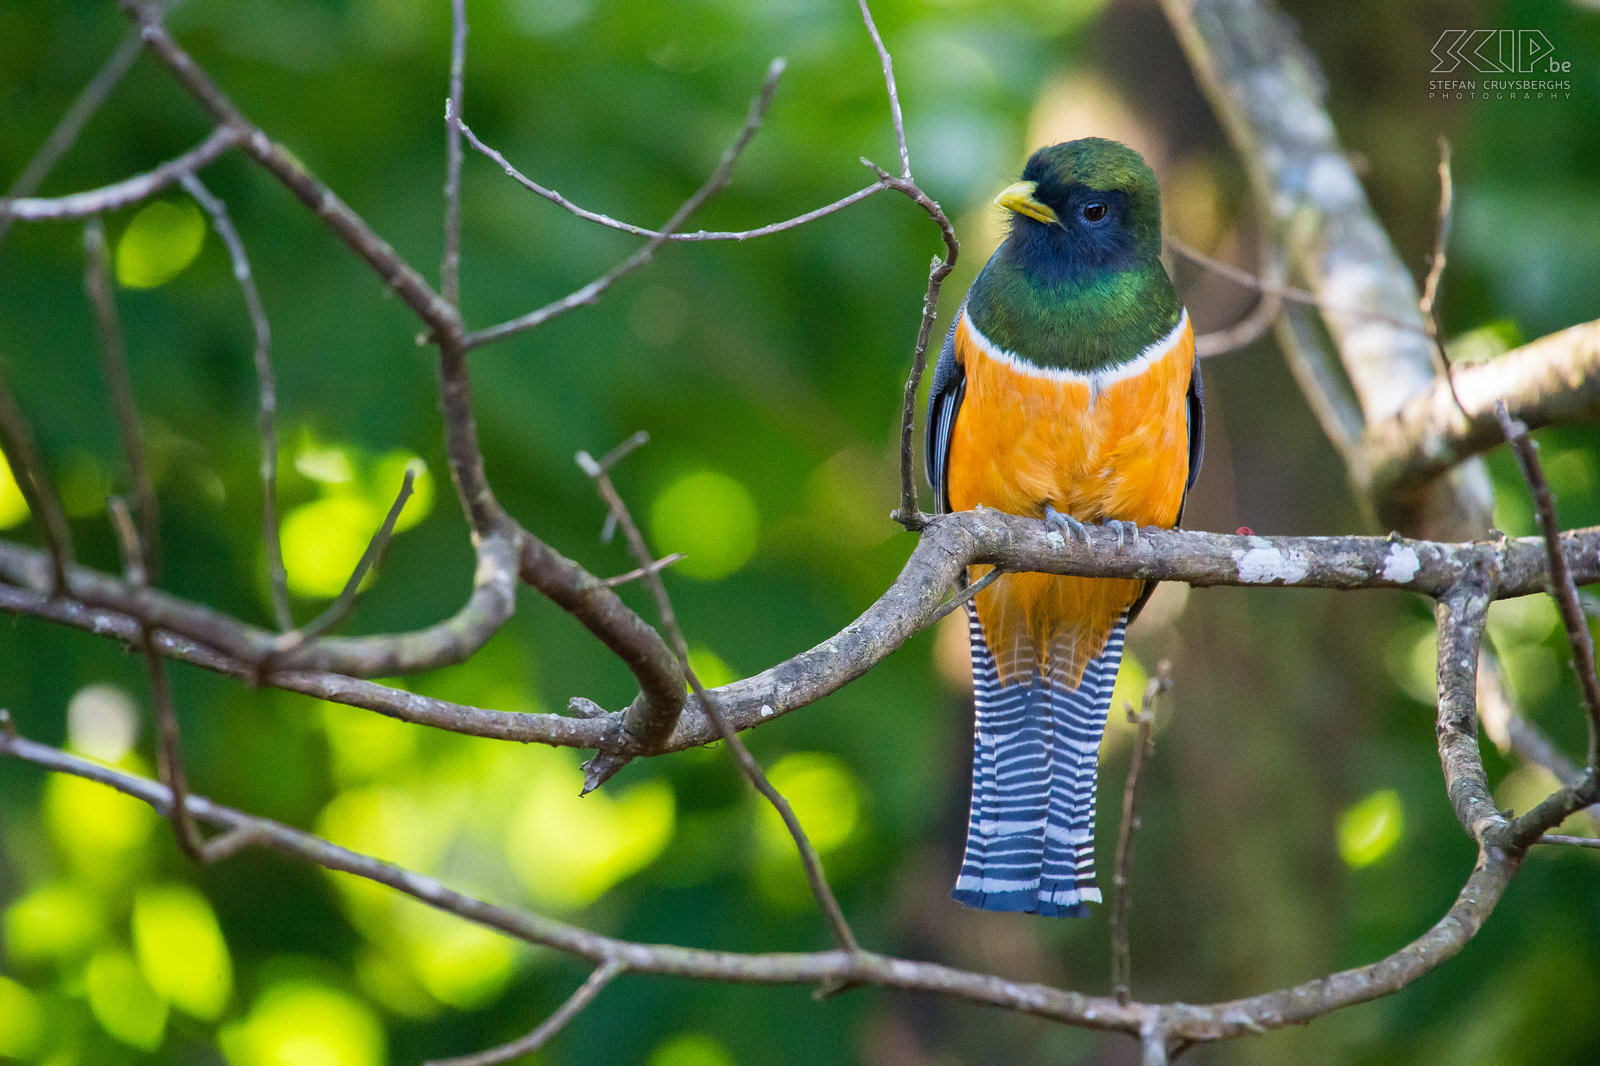 Arenal - Orange-bellied trogon A wonderful orange-bellied trogon (trogon aurantiiventris) in the forest near the lodge in Arenal Volcano national park.<br />
 Stefan Cruysberghs